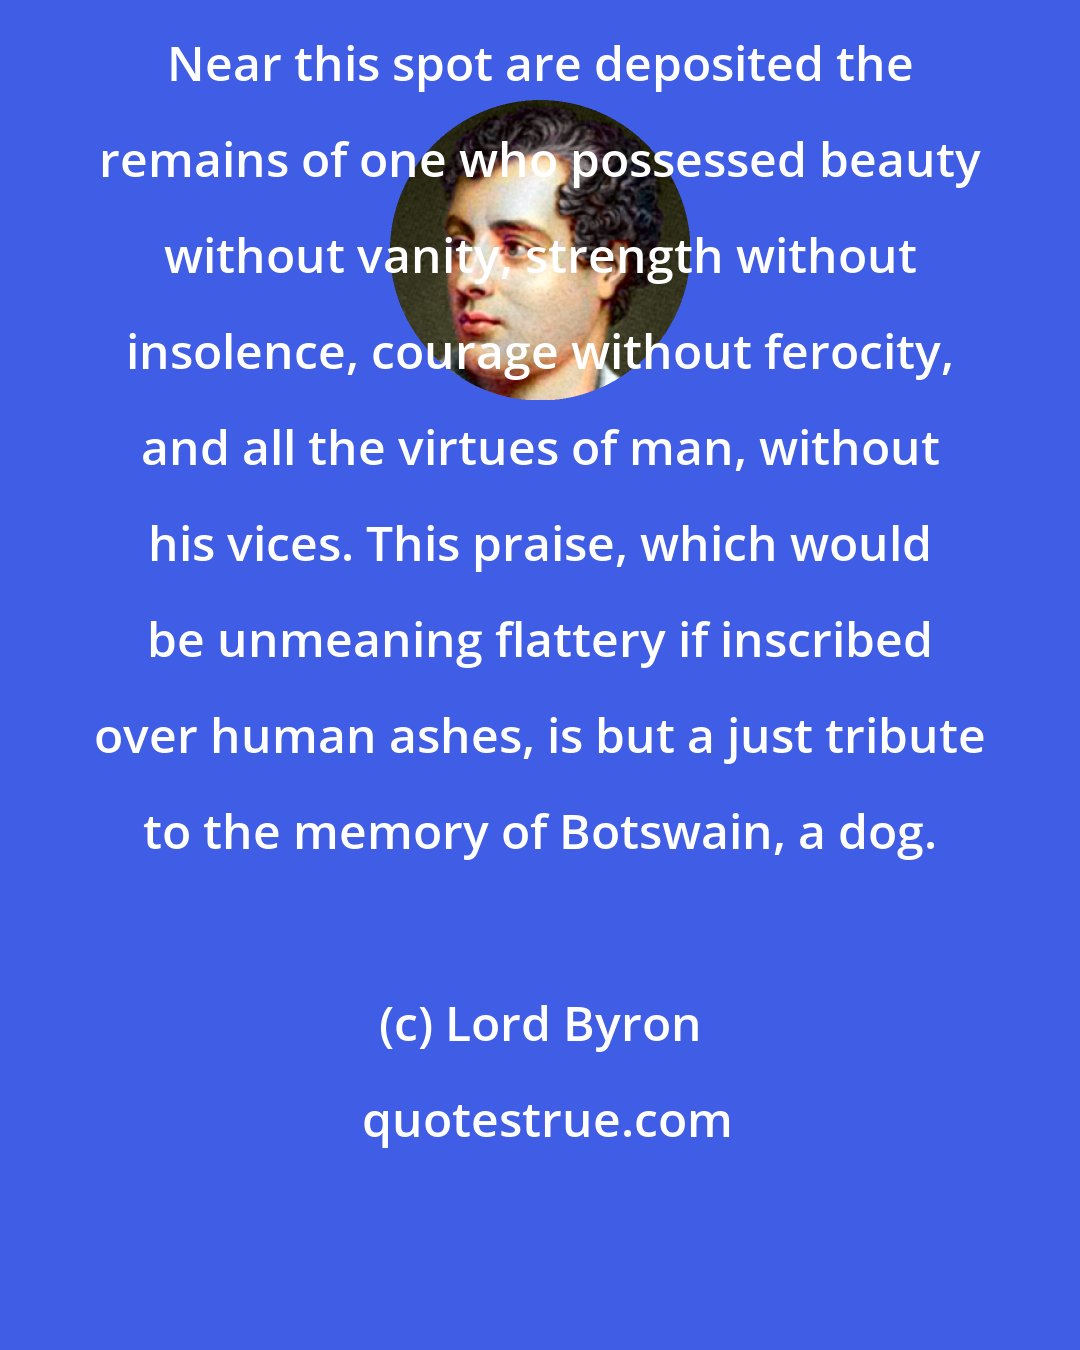 Lord Byron: Near this spot are deposited the remains of one who possessed beauty without vanity, strength without insolence, courage without ferocity, and all the virtues of man, without his vices. This praise, which would be unmeaning flattery if inscribed over human ashes, is but a just tribute to the memory of Botswain, a dog.